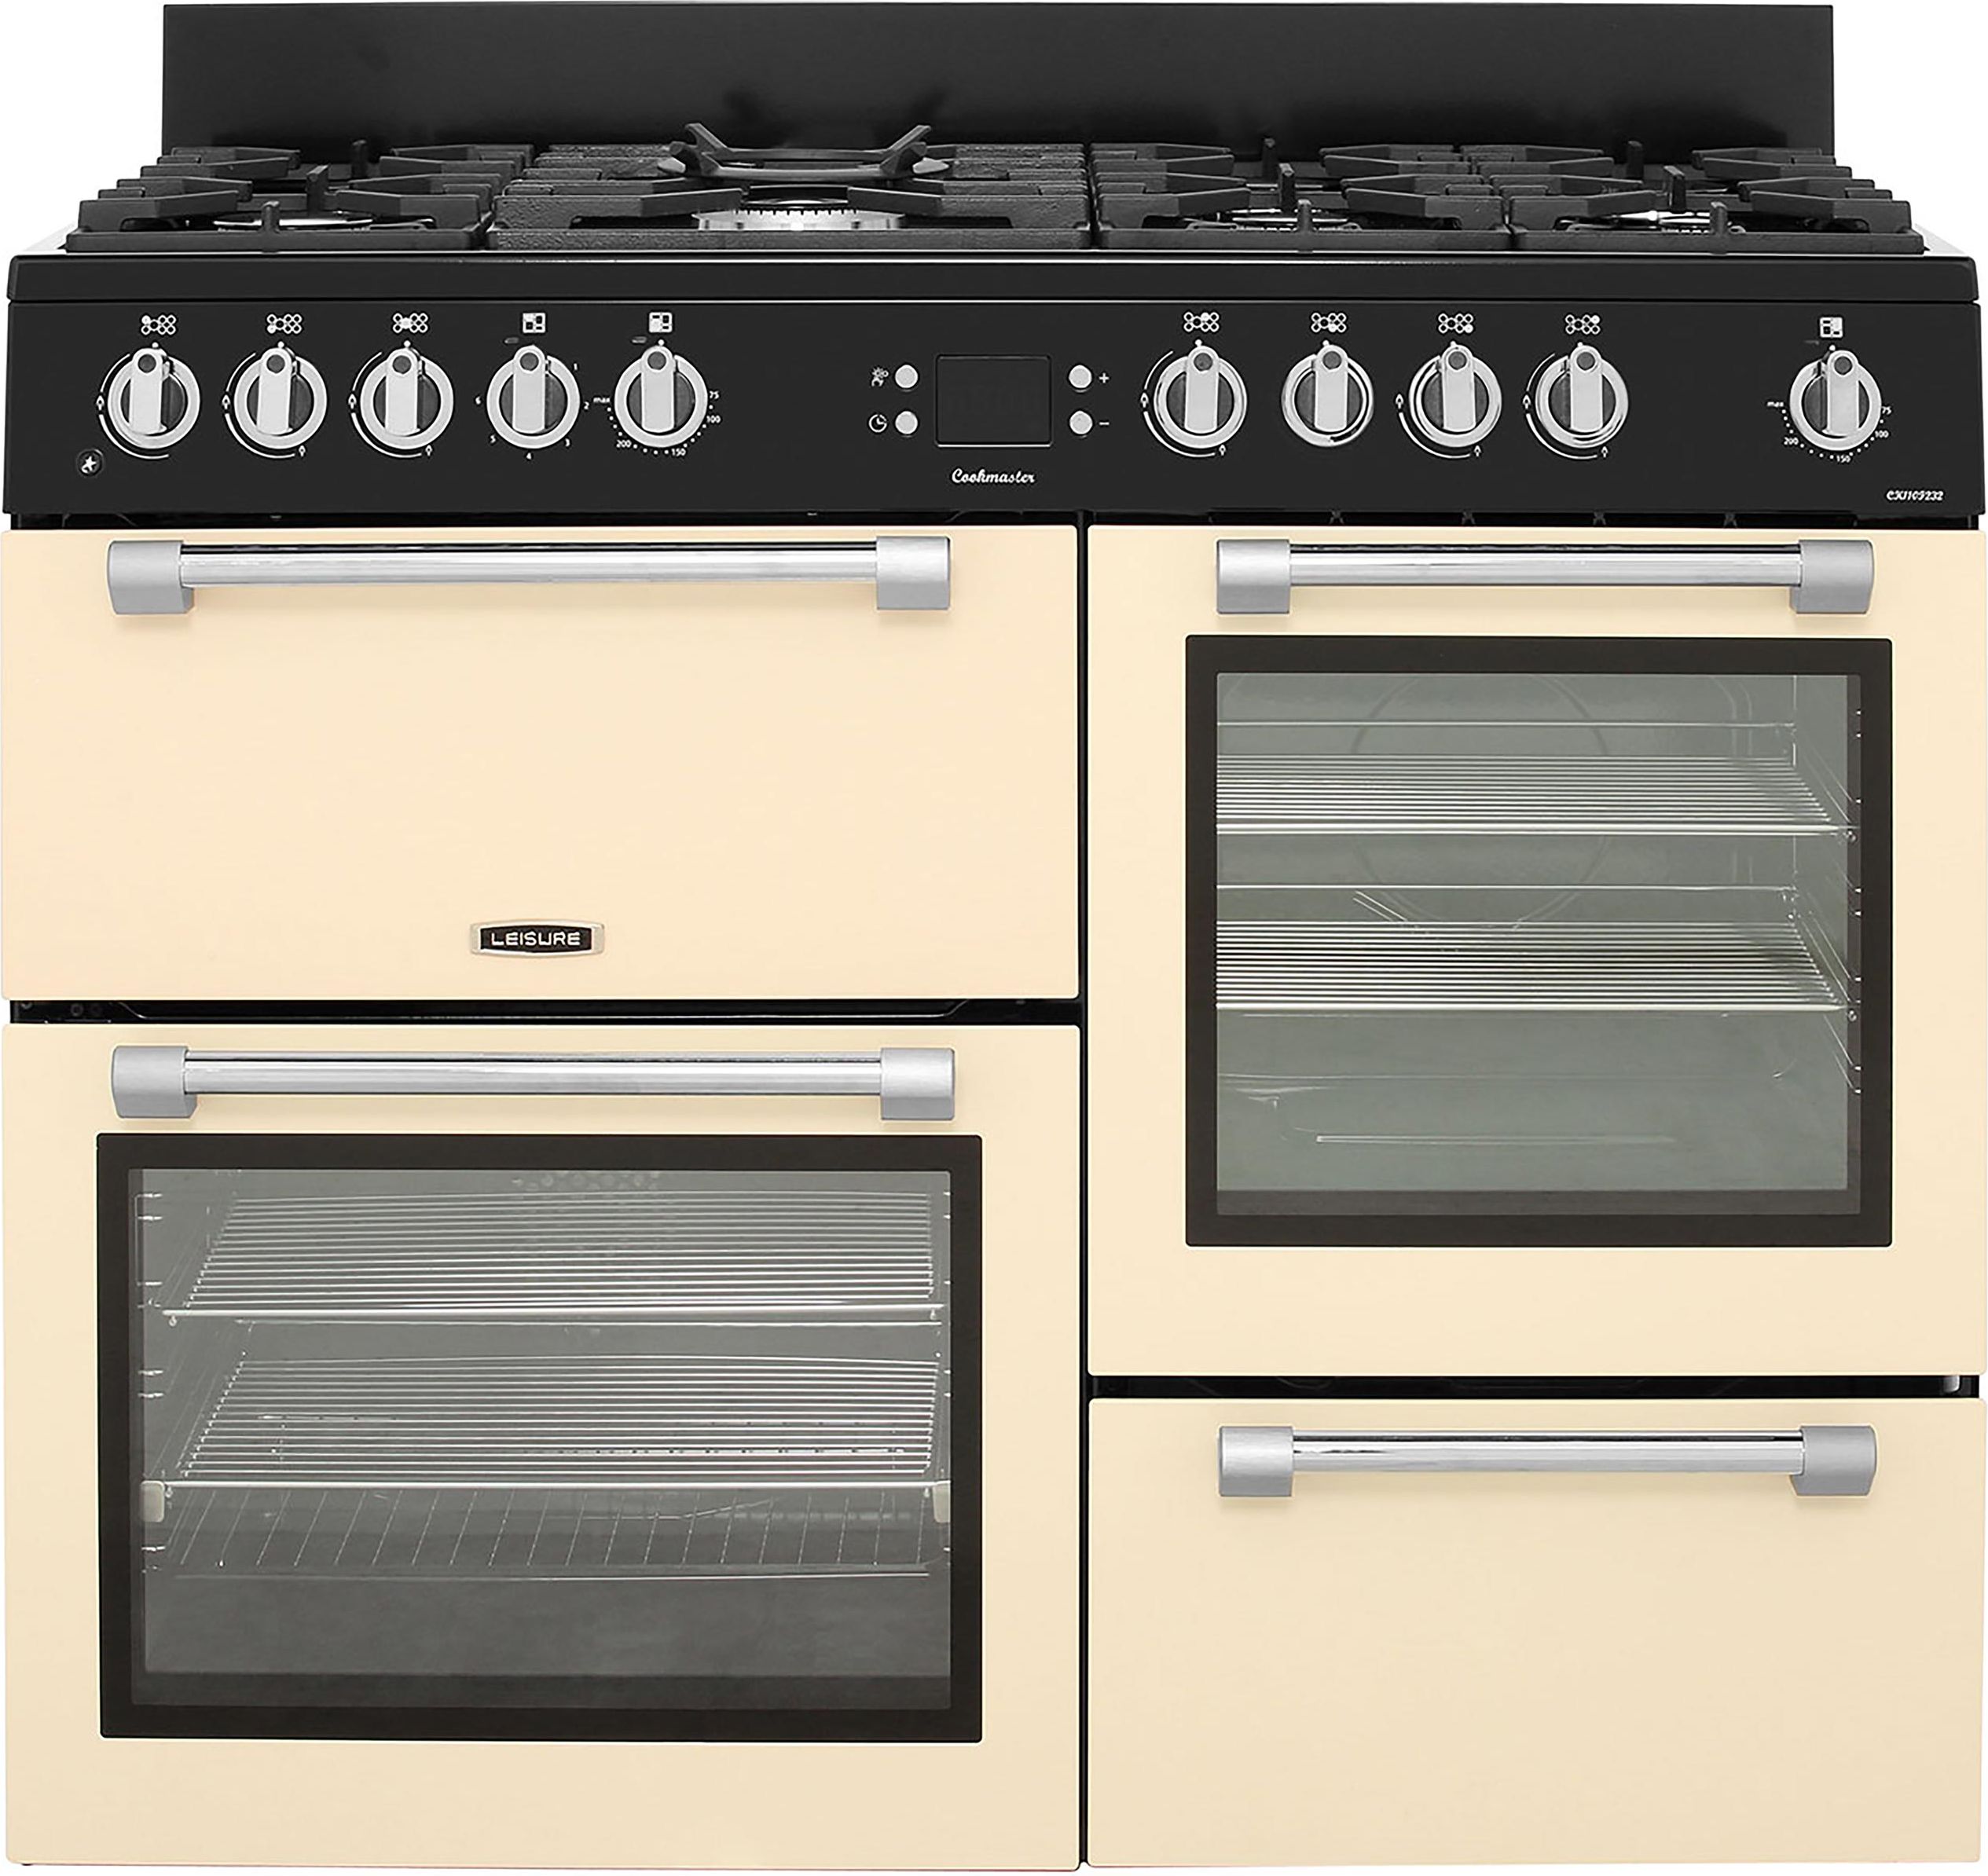 Leisure Cookmaster CK110F232C 110cm Dual Fuel Range Cooker - Cream - A/A Rated, Cream